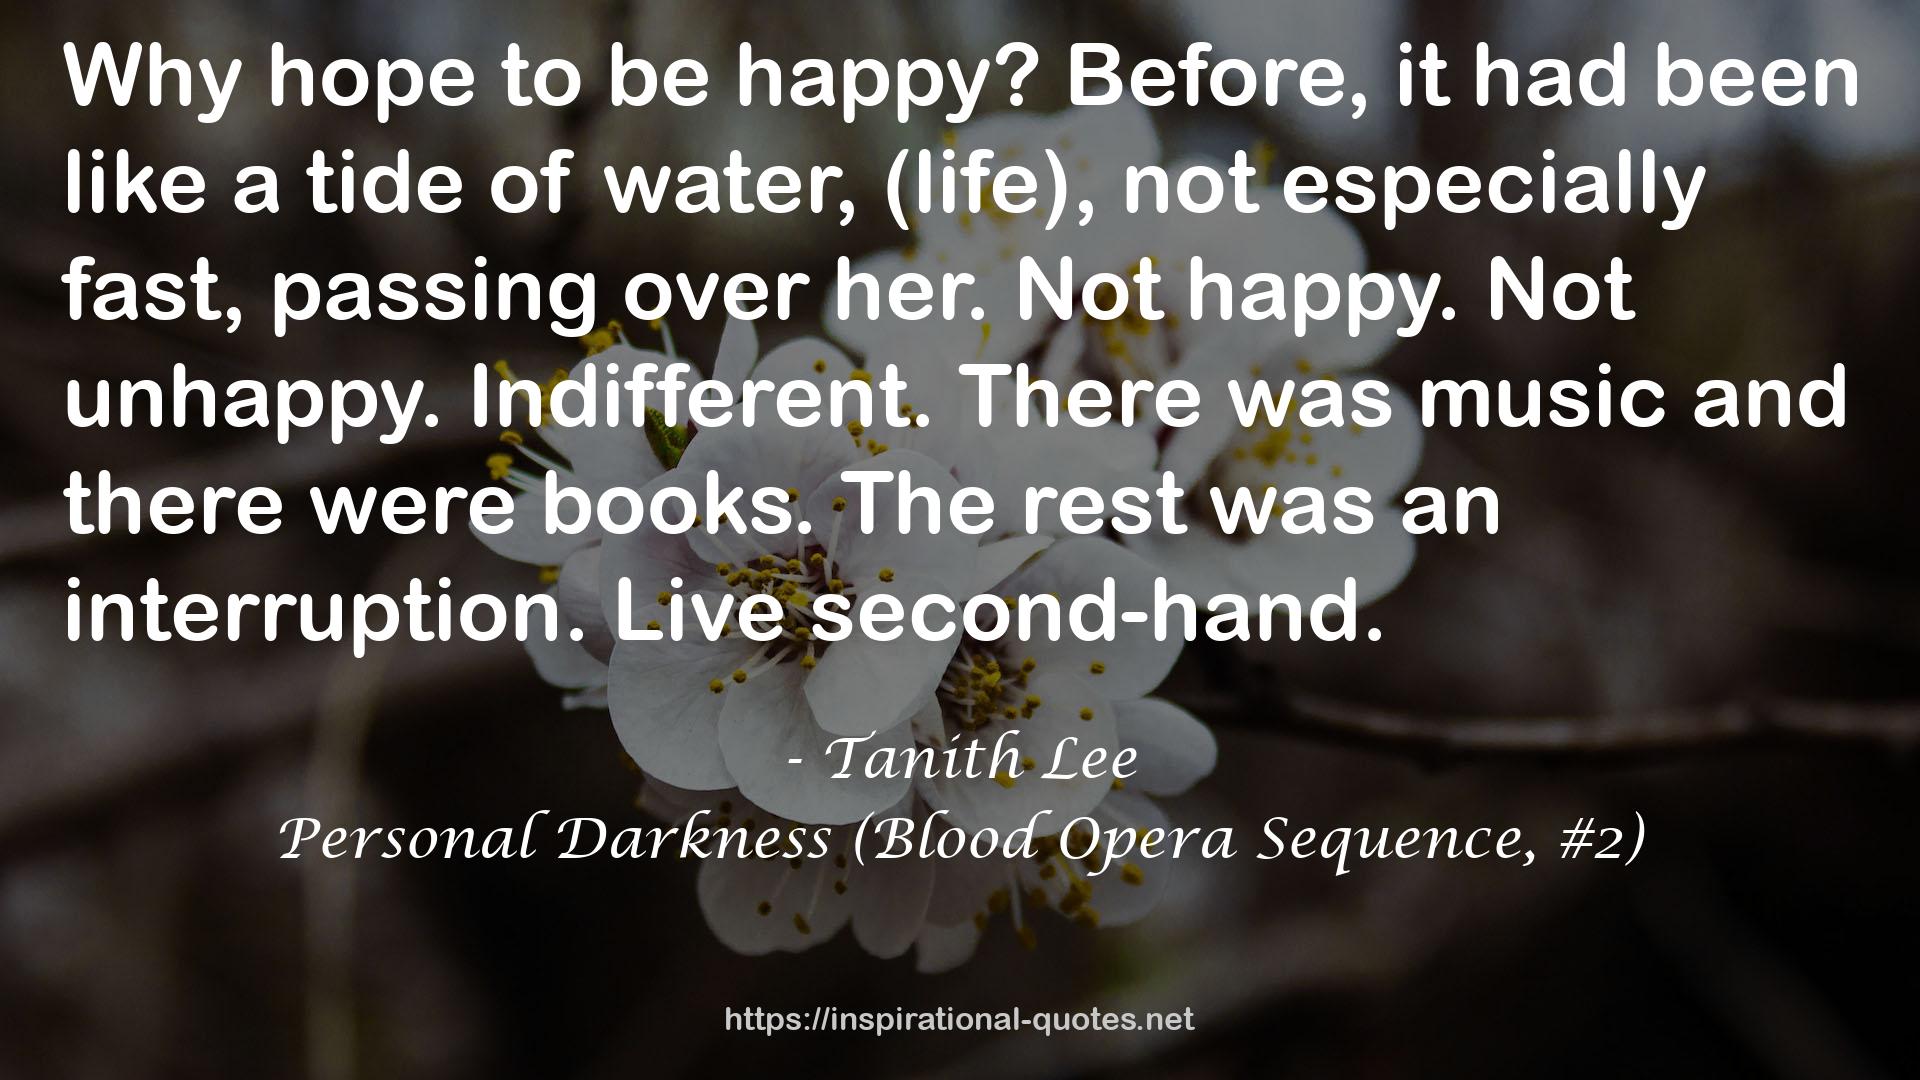 Personal Darkness (Blood Opera Sequence, #2) QUOTES